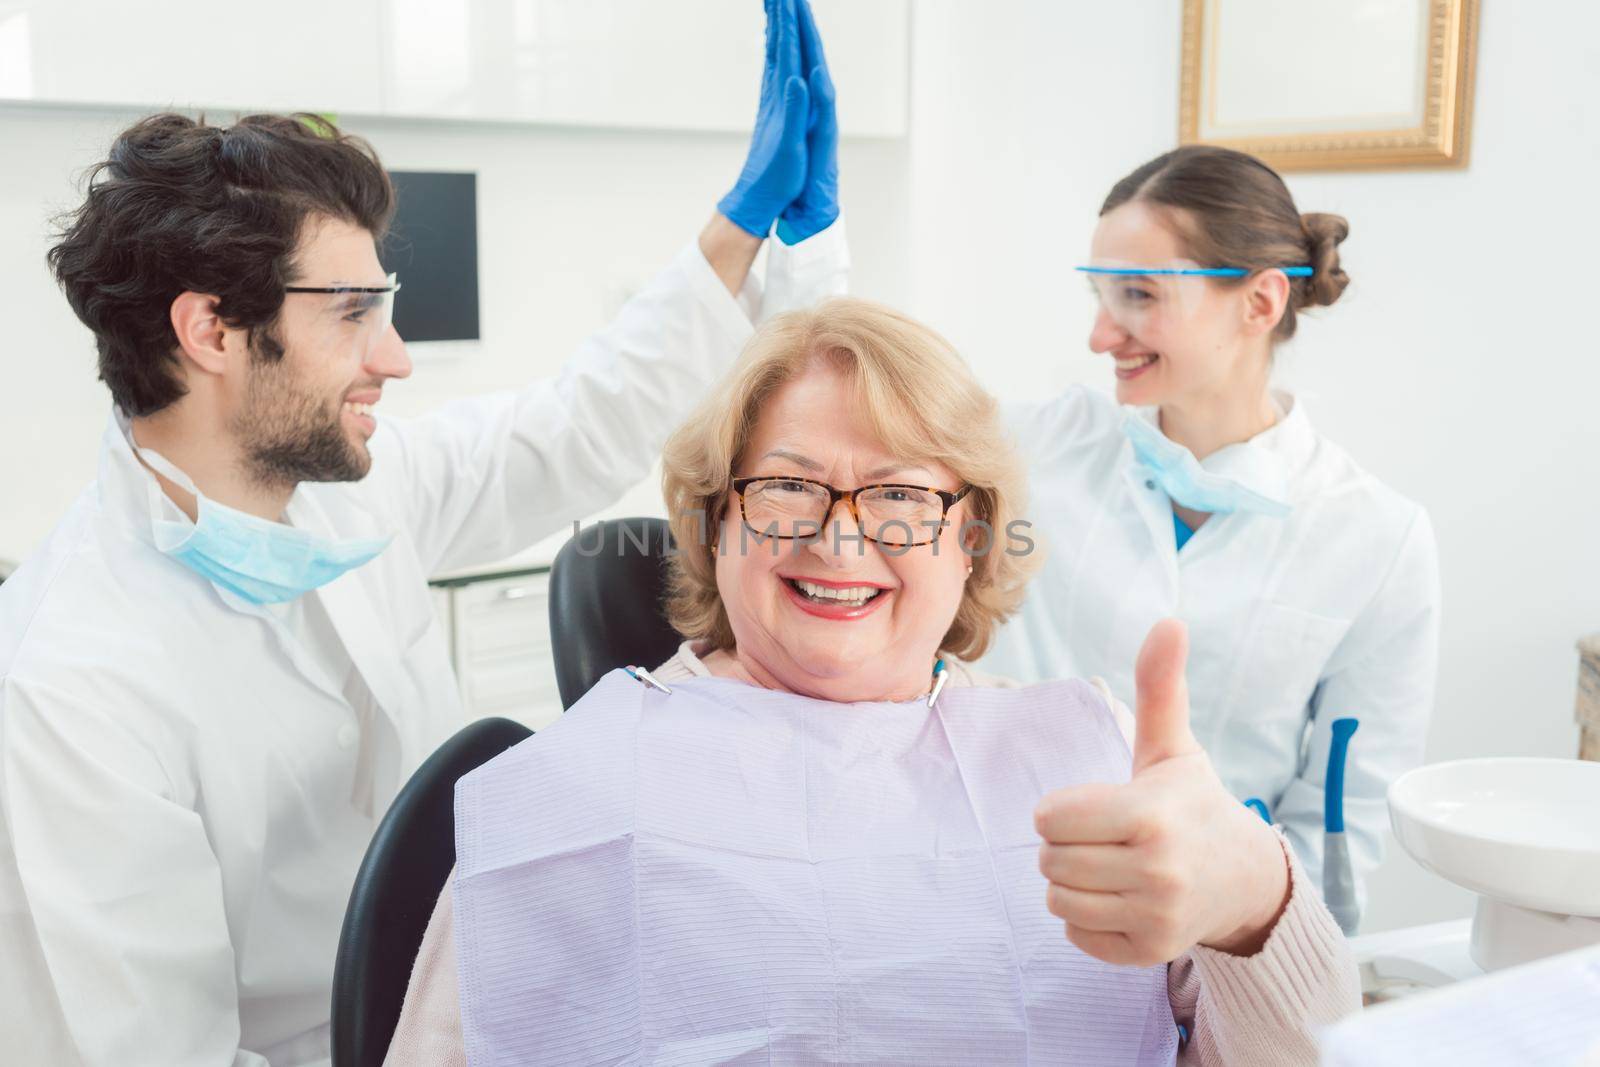 Dentists and patient in surgery being excited by Kzenon